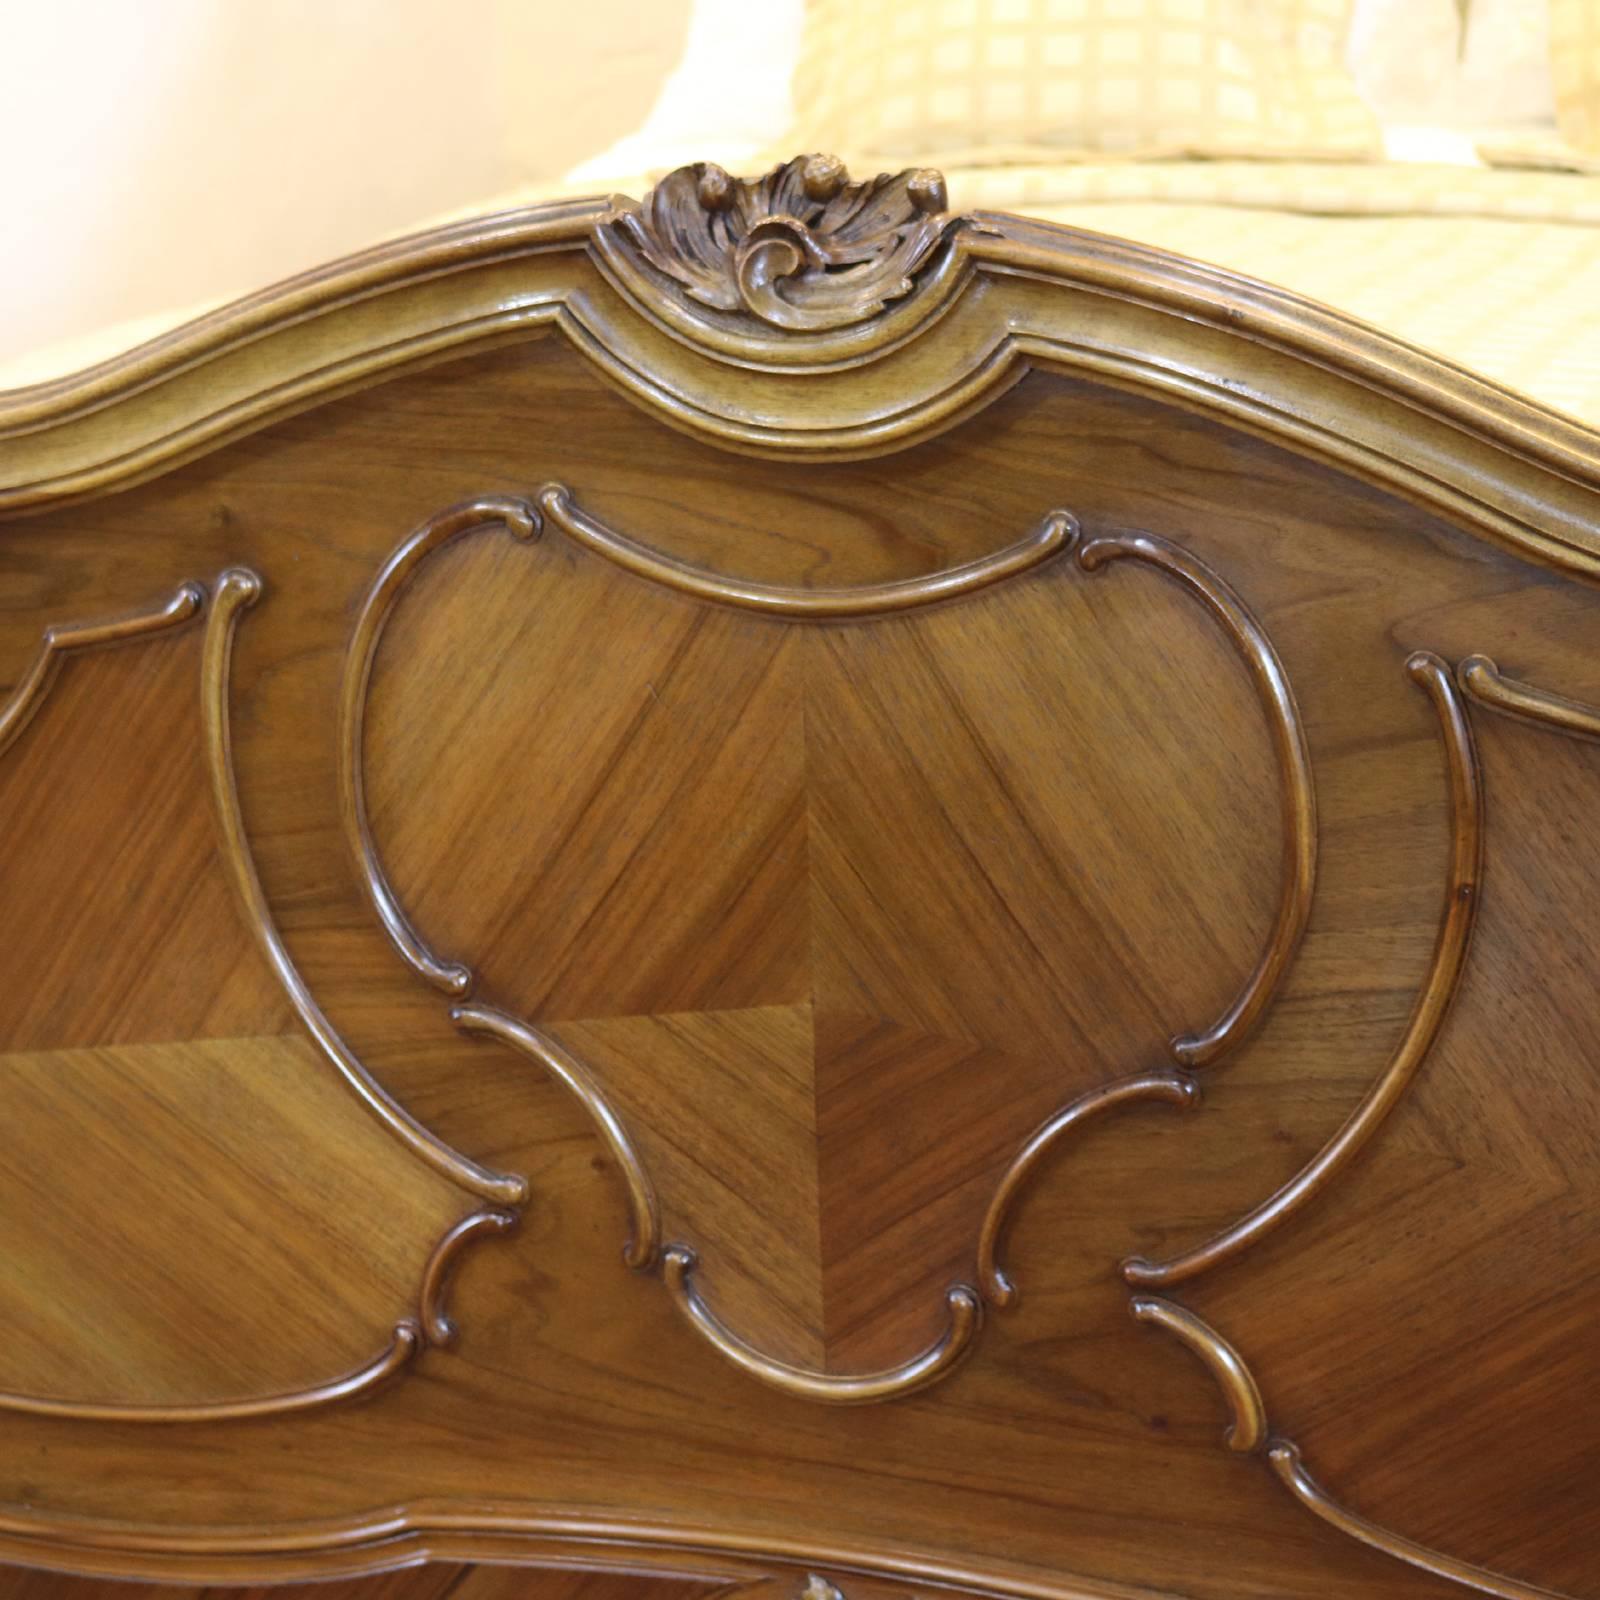 A Louis XV style bed in walnut with beaded panels and carved head pediment.

This bed accepts a 60 inch wide (UK king-size or American Queen Size) base and mattress.

The price is for the bed frame alone. The base, mattress, bedding and linen are